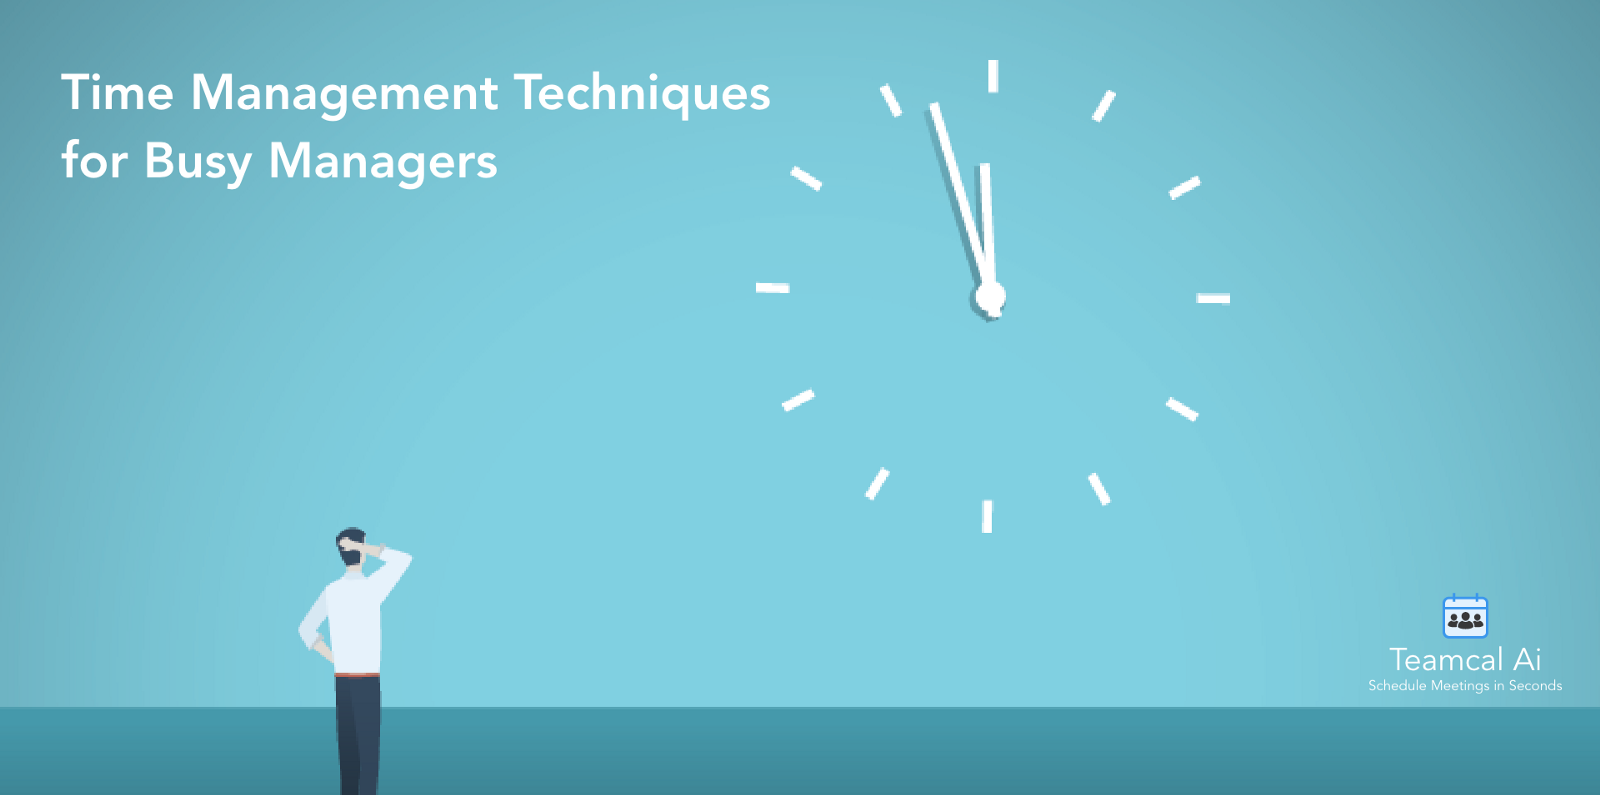 image of 7 Time Management Techniques for Busy Managers